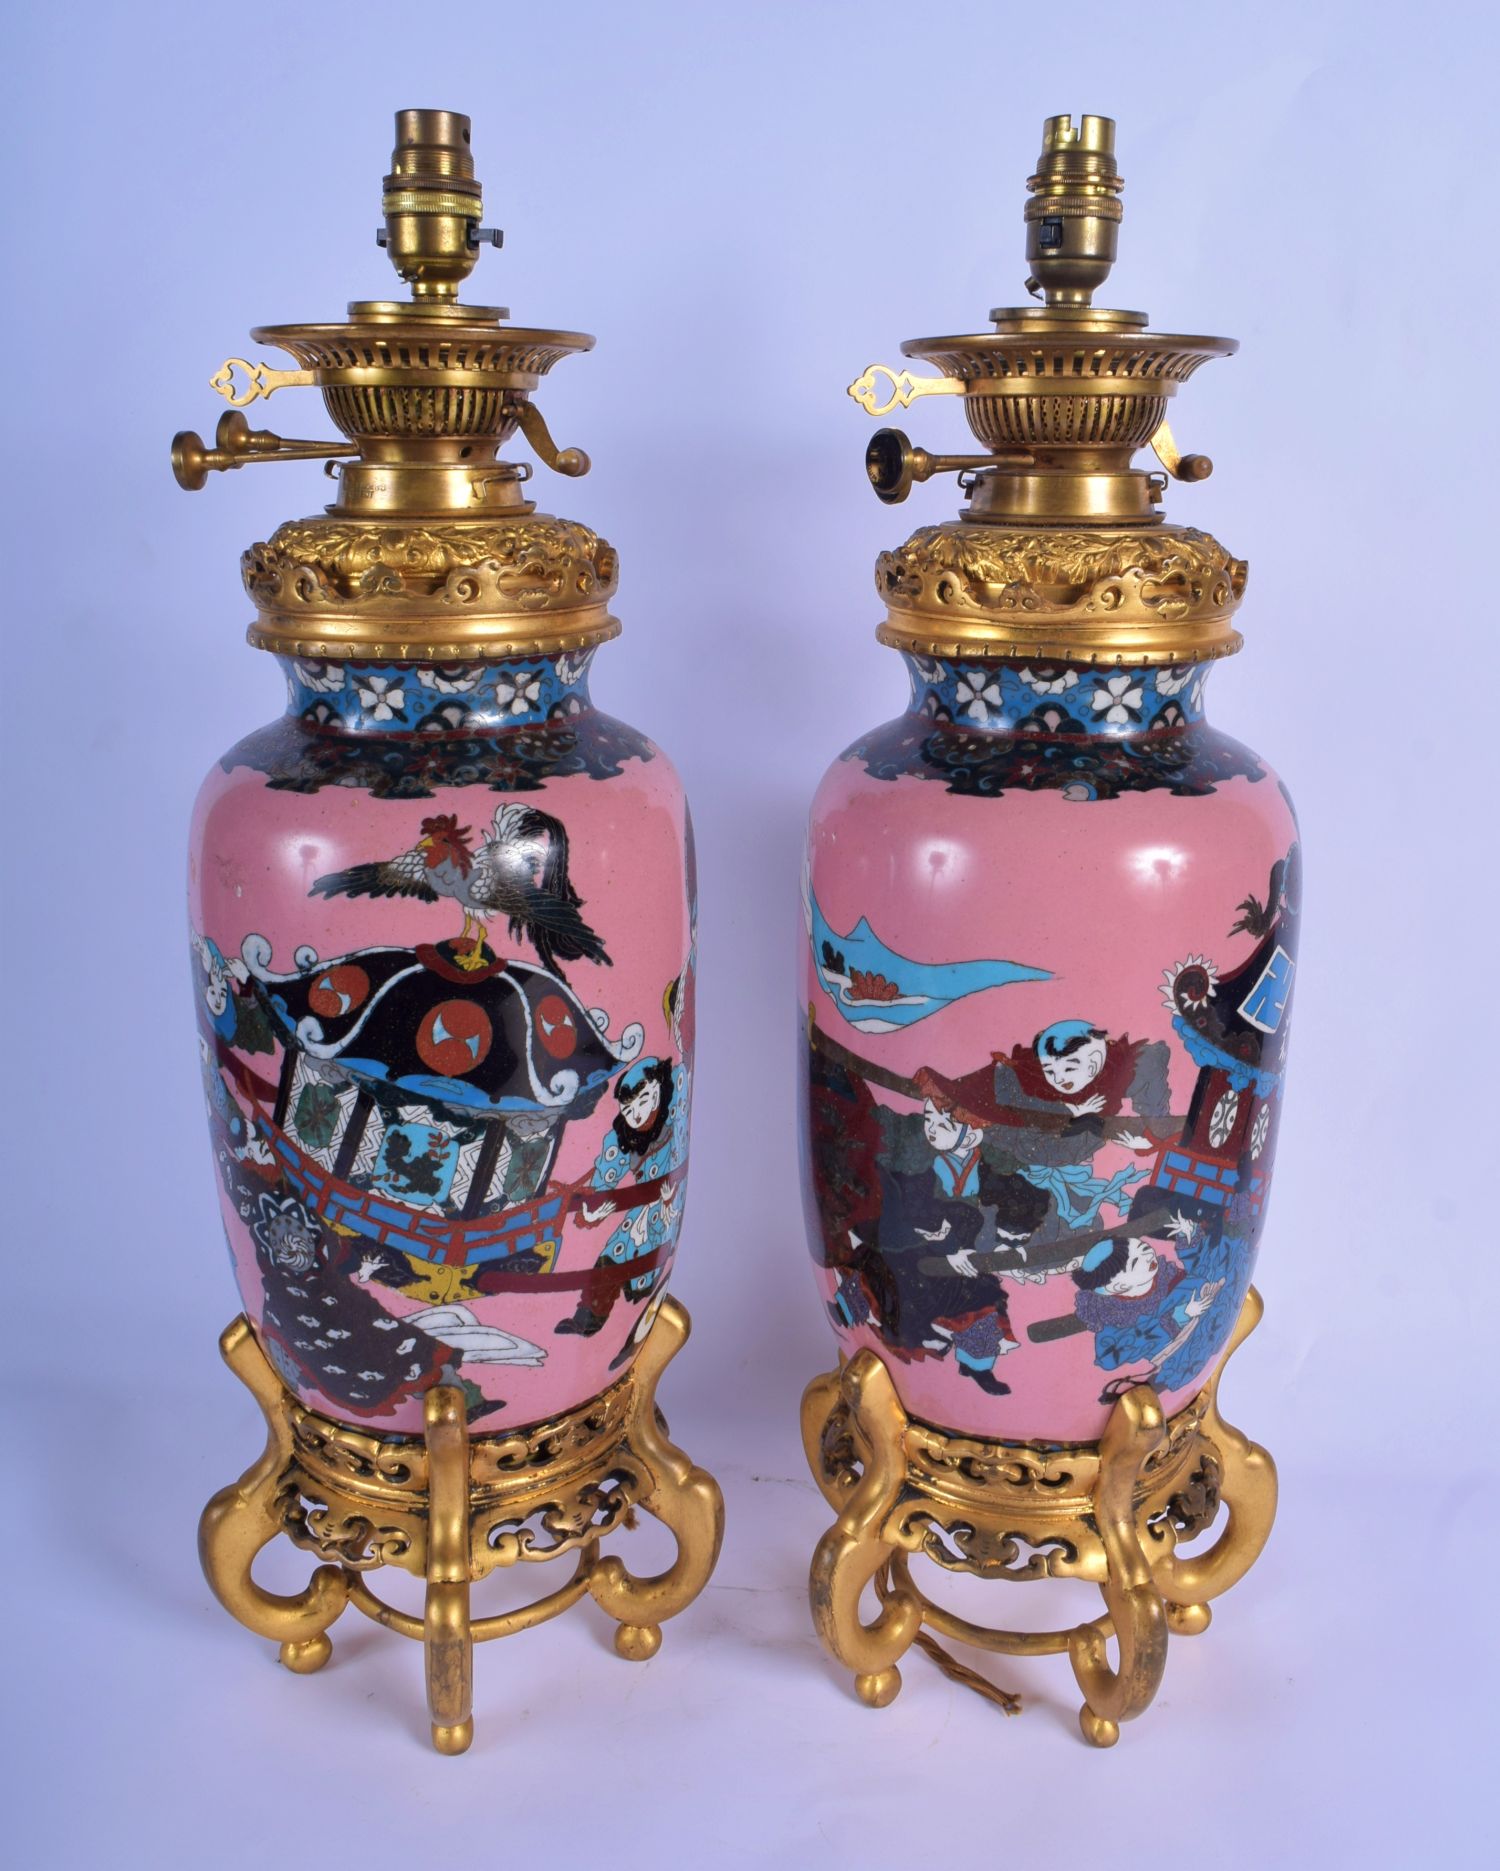 A LARGE PAIR OF 19TH CENTURY JAPANESE MEIJI PERIOD CLOISONNE ENAMEL VASES converted to oil lamps, de - Image 2 of 3